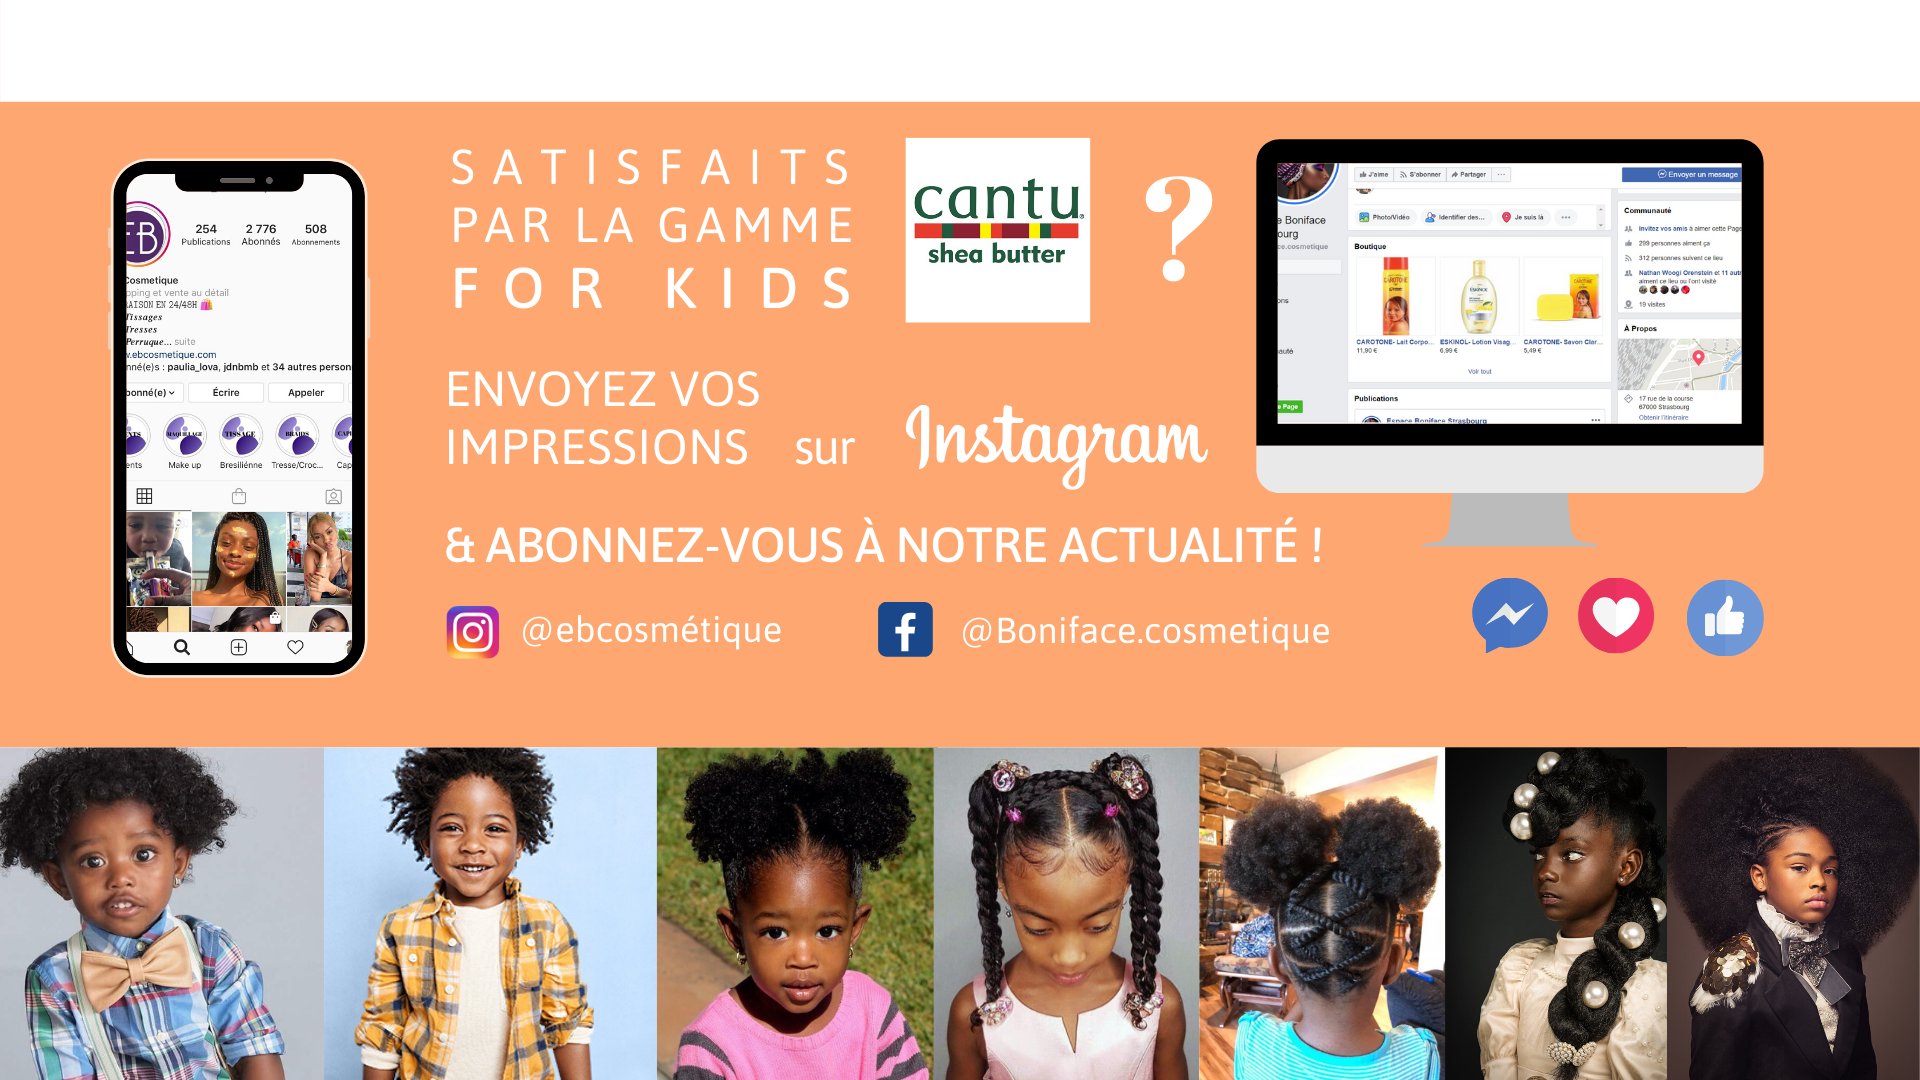 fiche produit ebcosmetique cantu shea butter natural hair care for kids leave-in conditioner routine capillaire afro bouclé facebook instagram